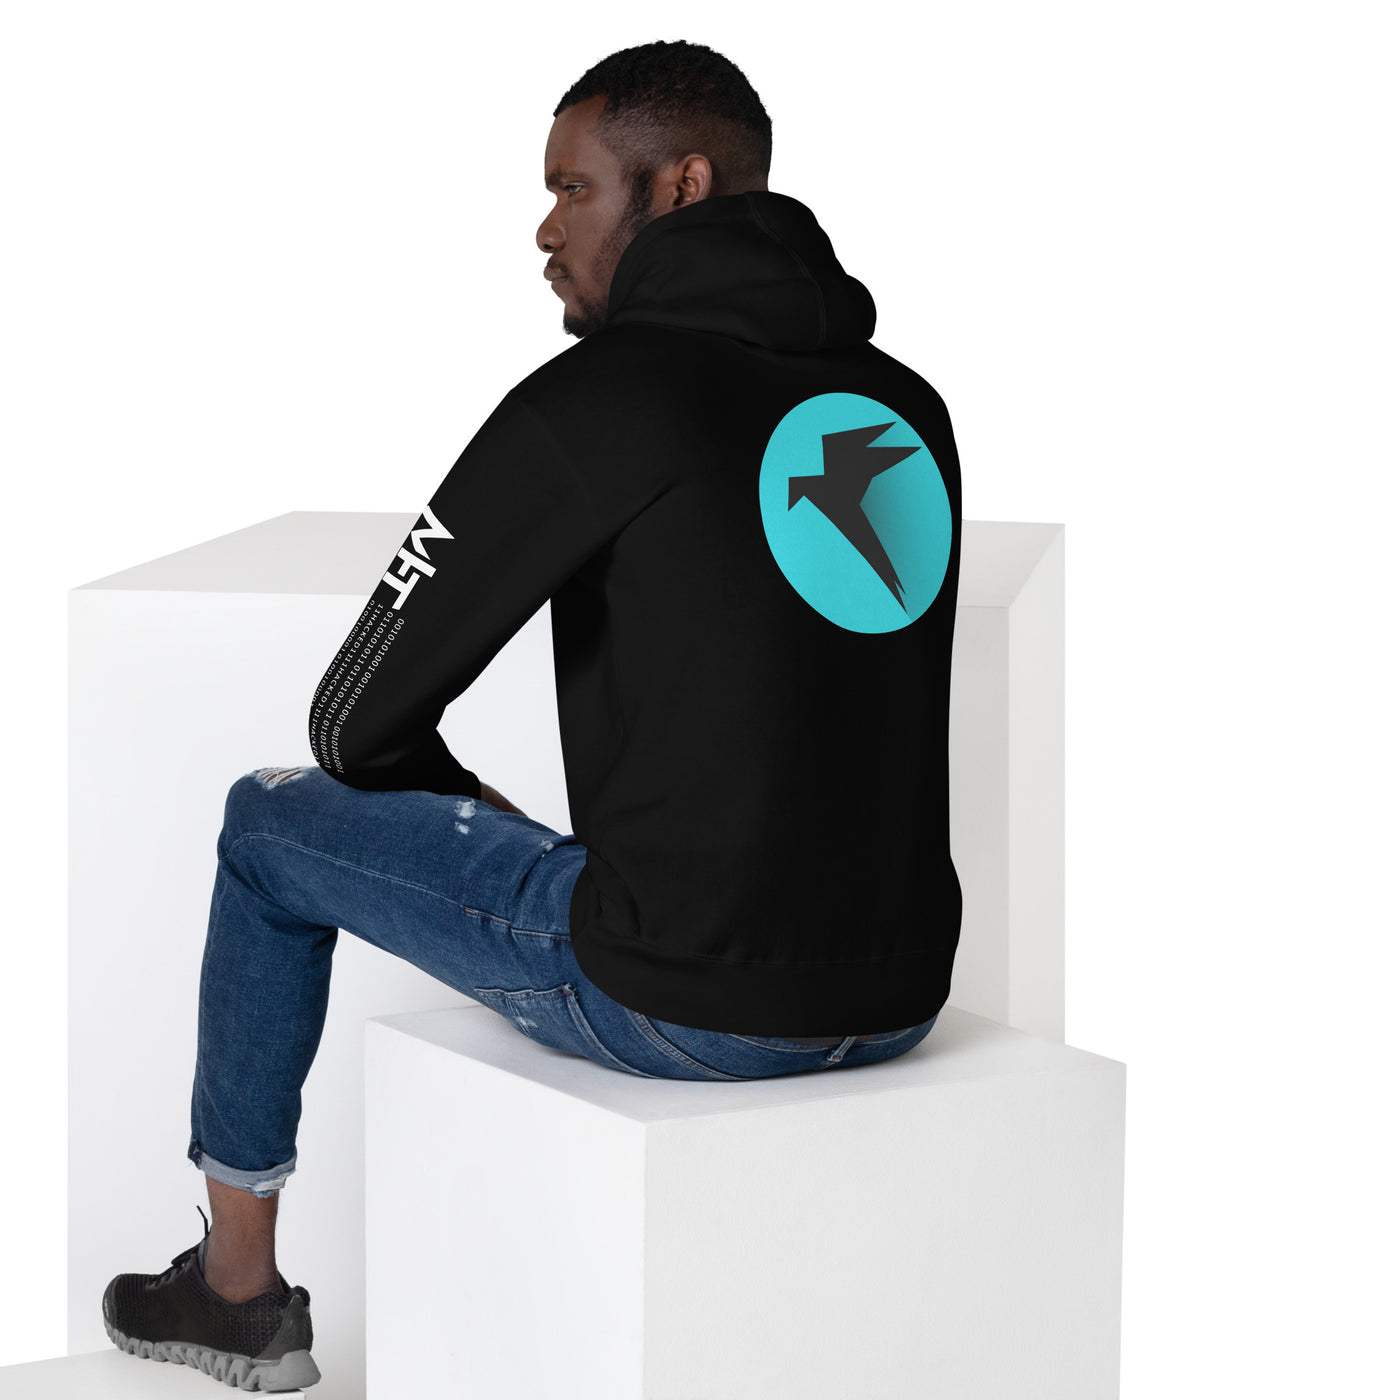 Parrot OS - The operating system for Hackers - Unisex Hoodie (back print)